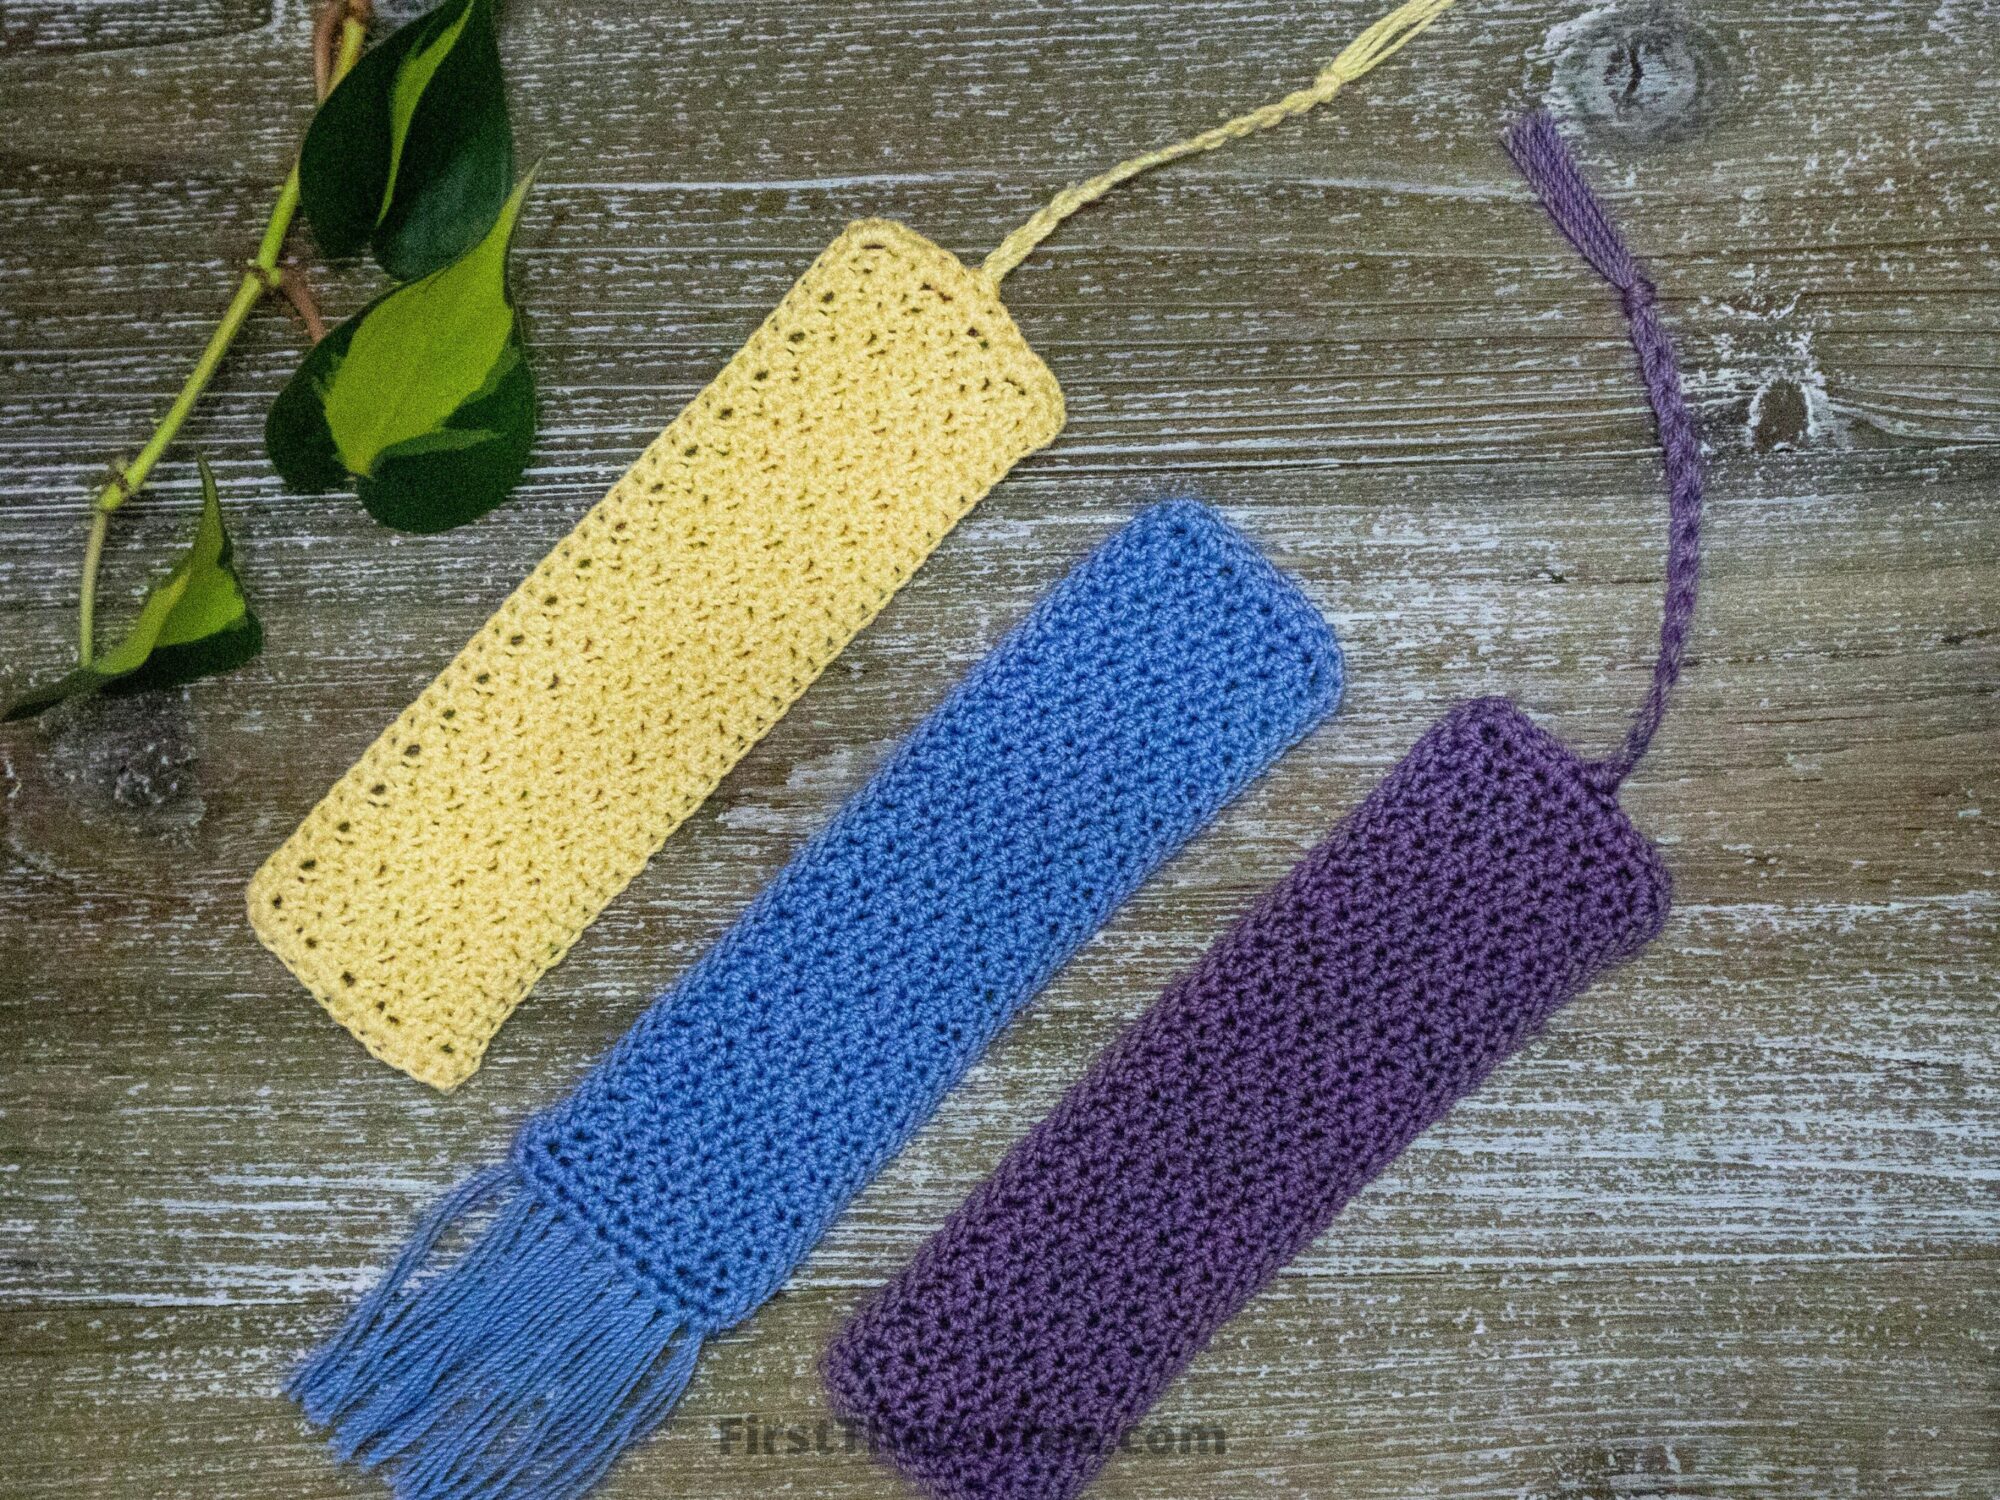 All 3 crochet bookmarks, one with fringe on the end and two with braids and a tassel